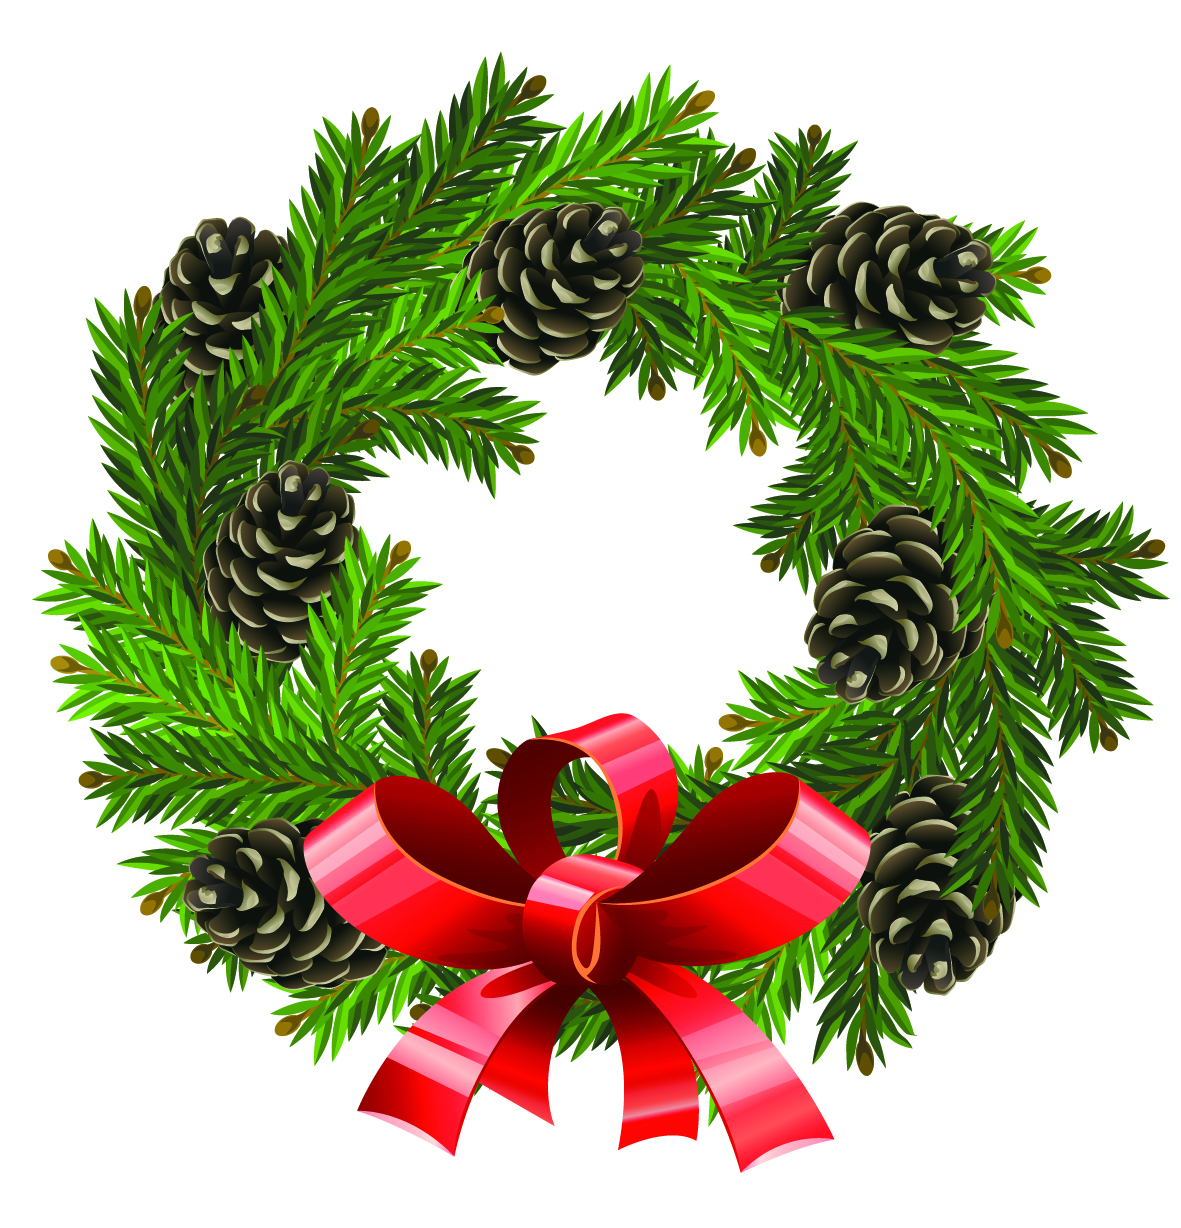 free clipart of christmas wreaths - photo #6